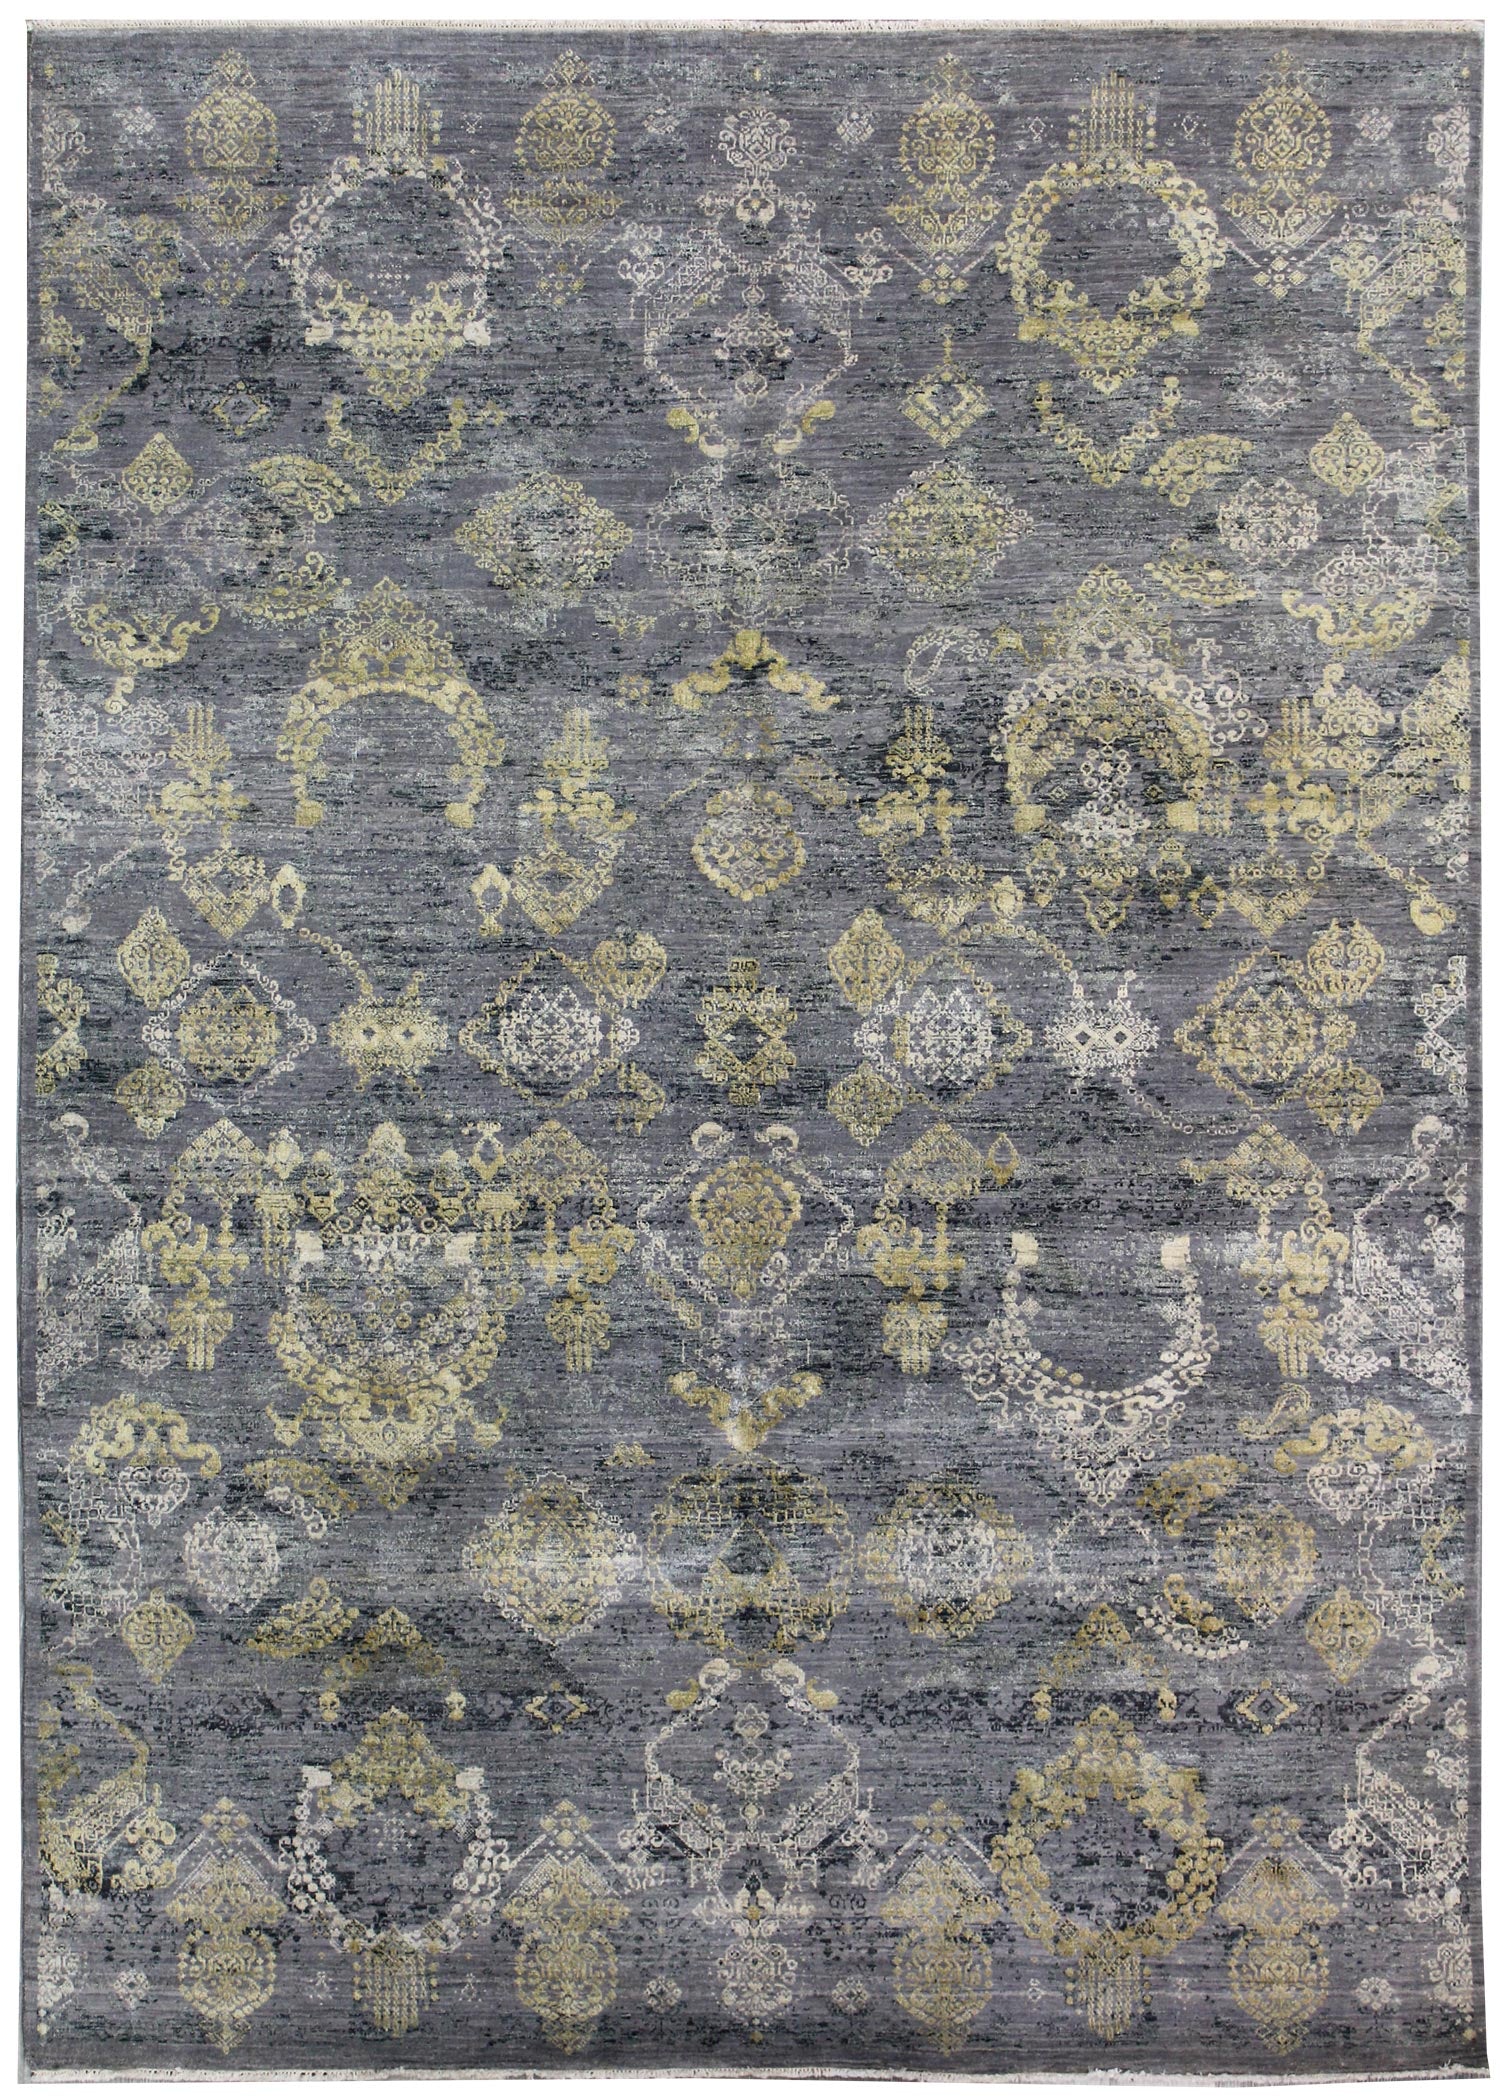 Magnificent Handwoven Transitional Rug